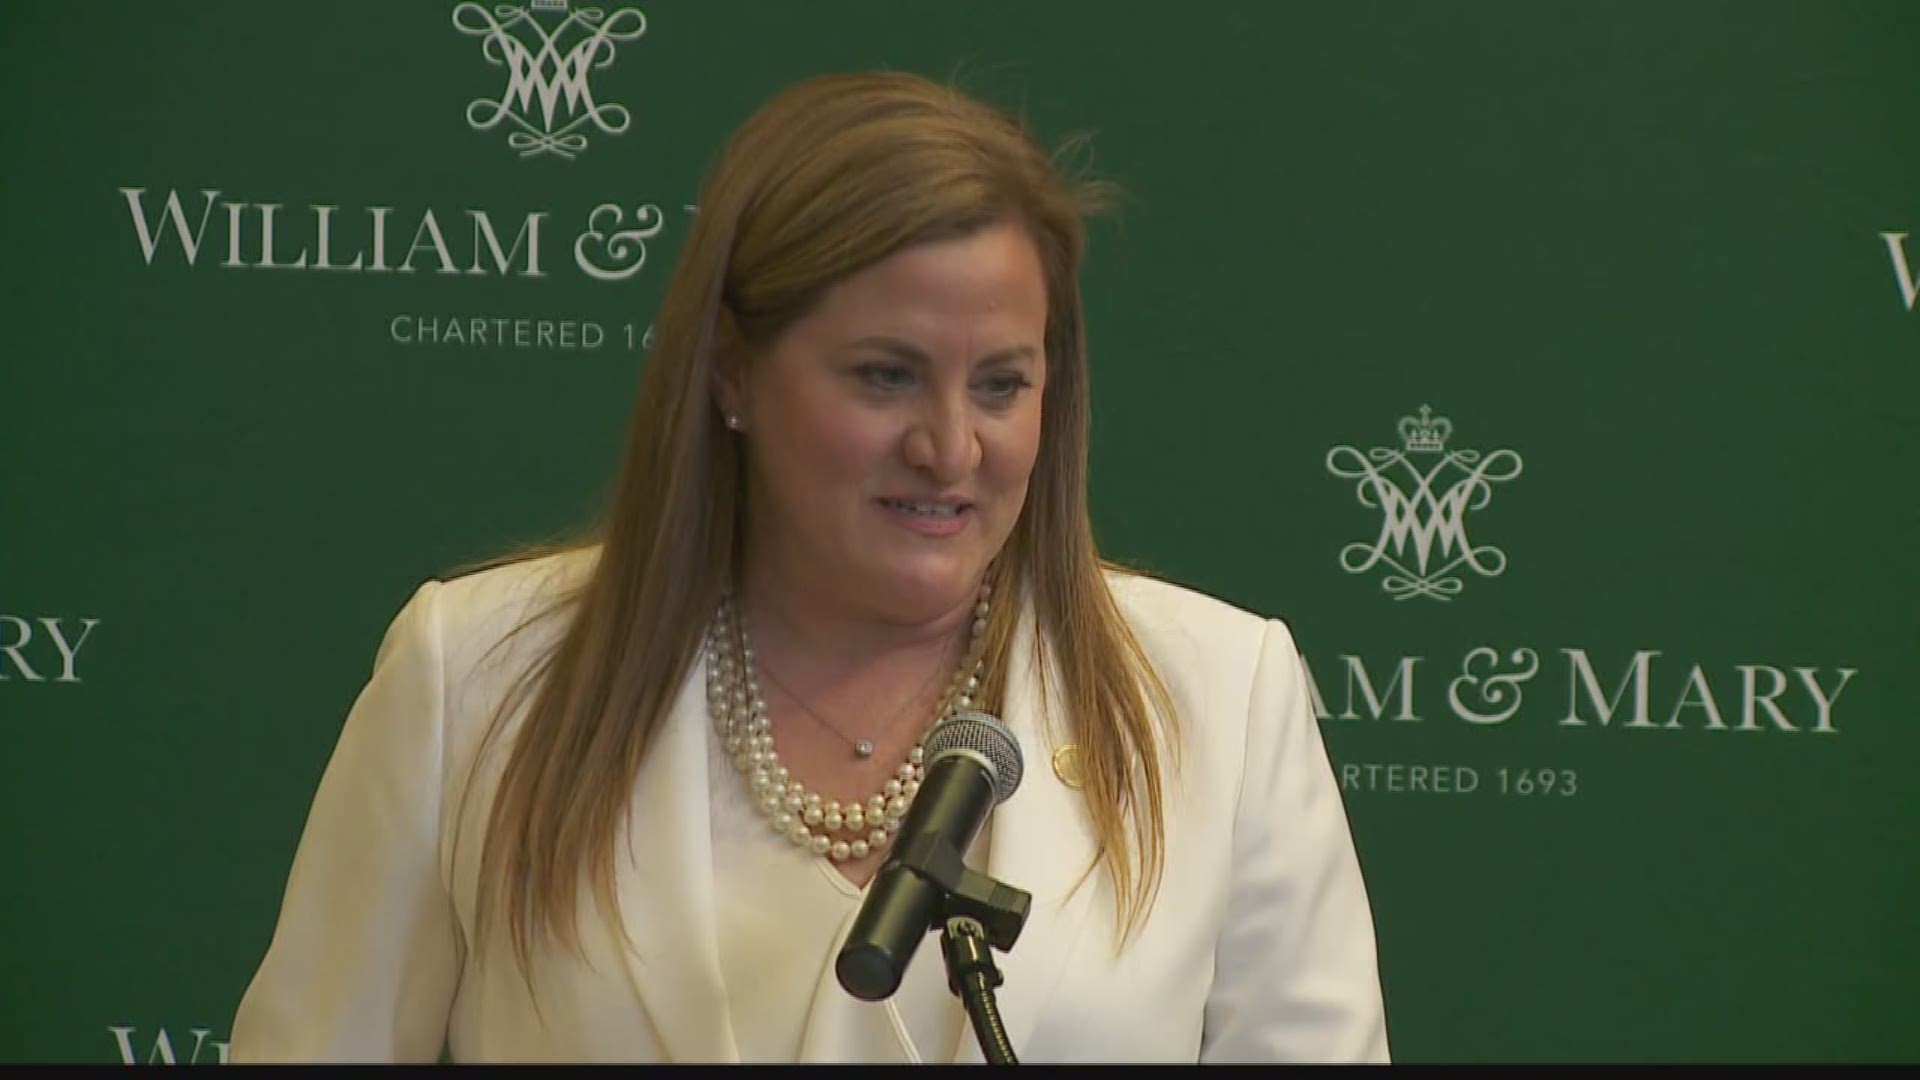 William and Mary introduced Samantha Huge as the next athletics director and the first woman to have that position.